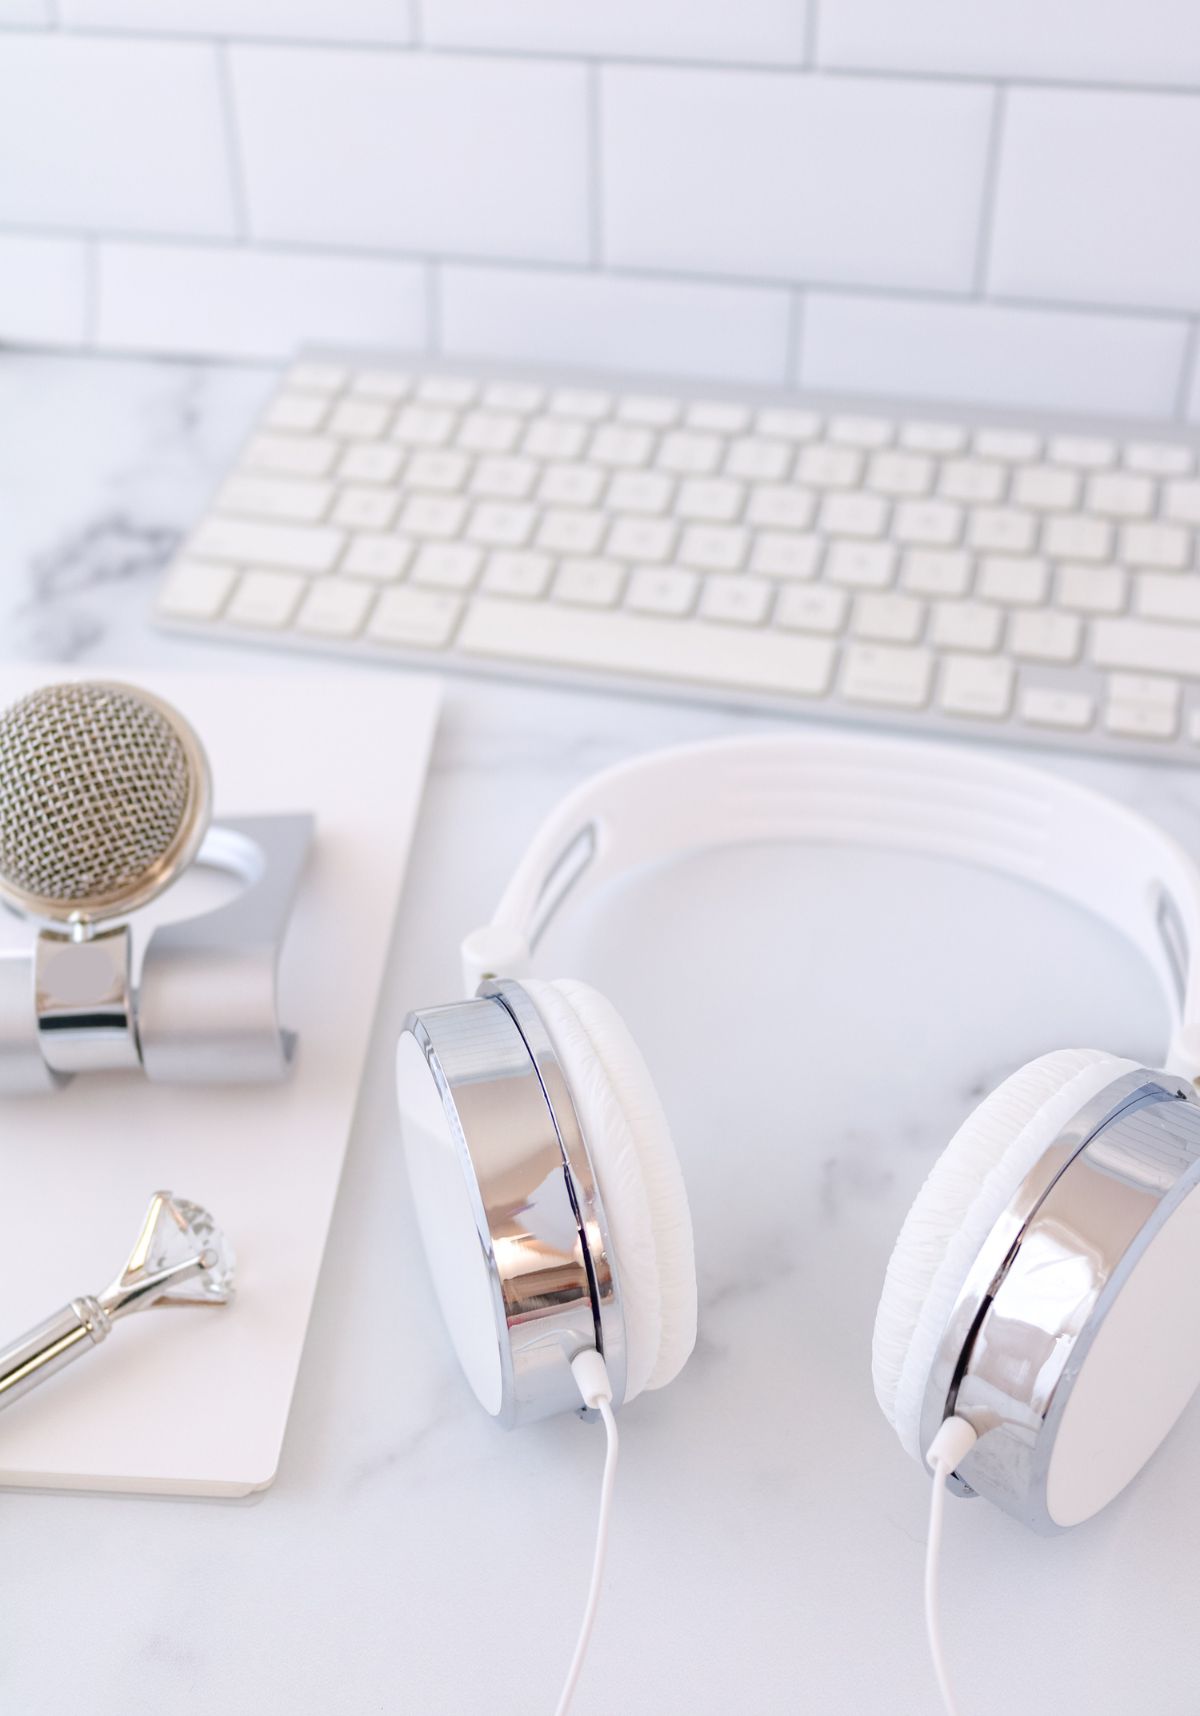 Podcasts that will motivate and inspire you